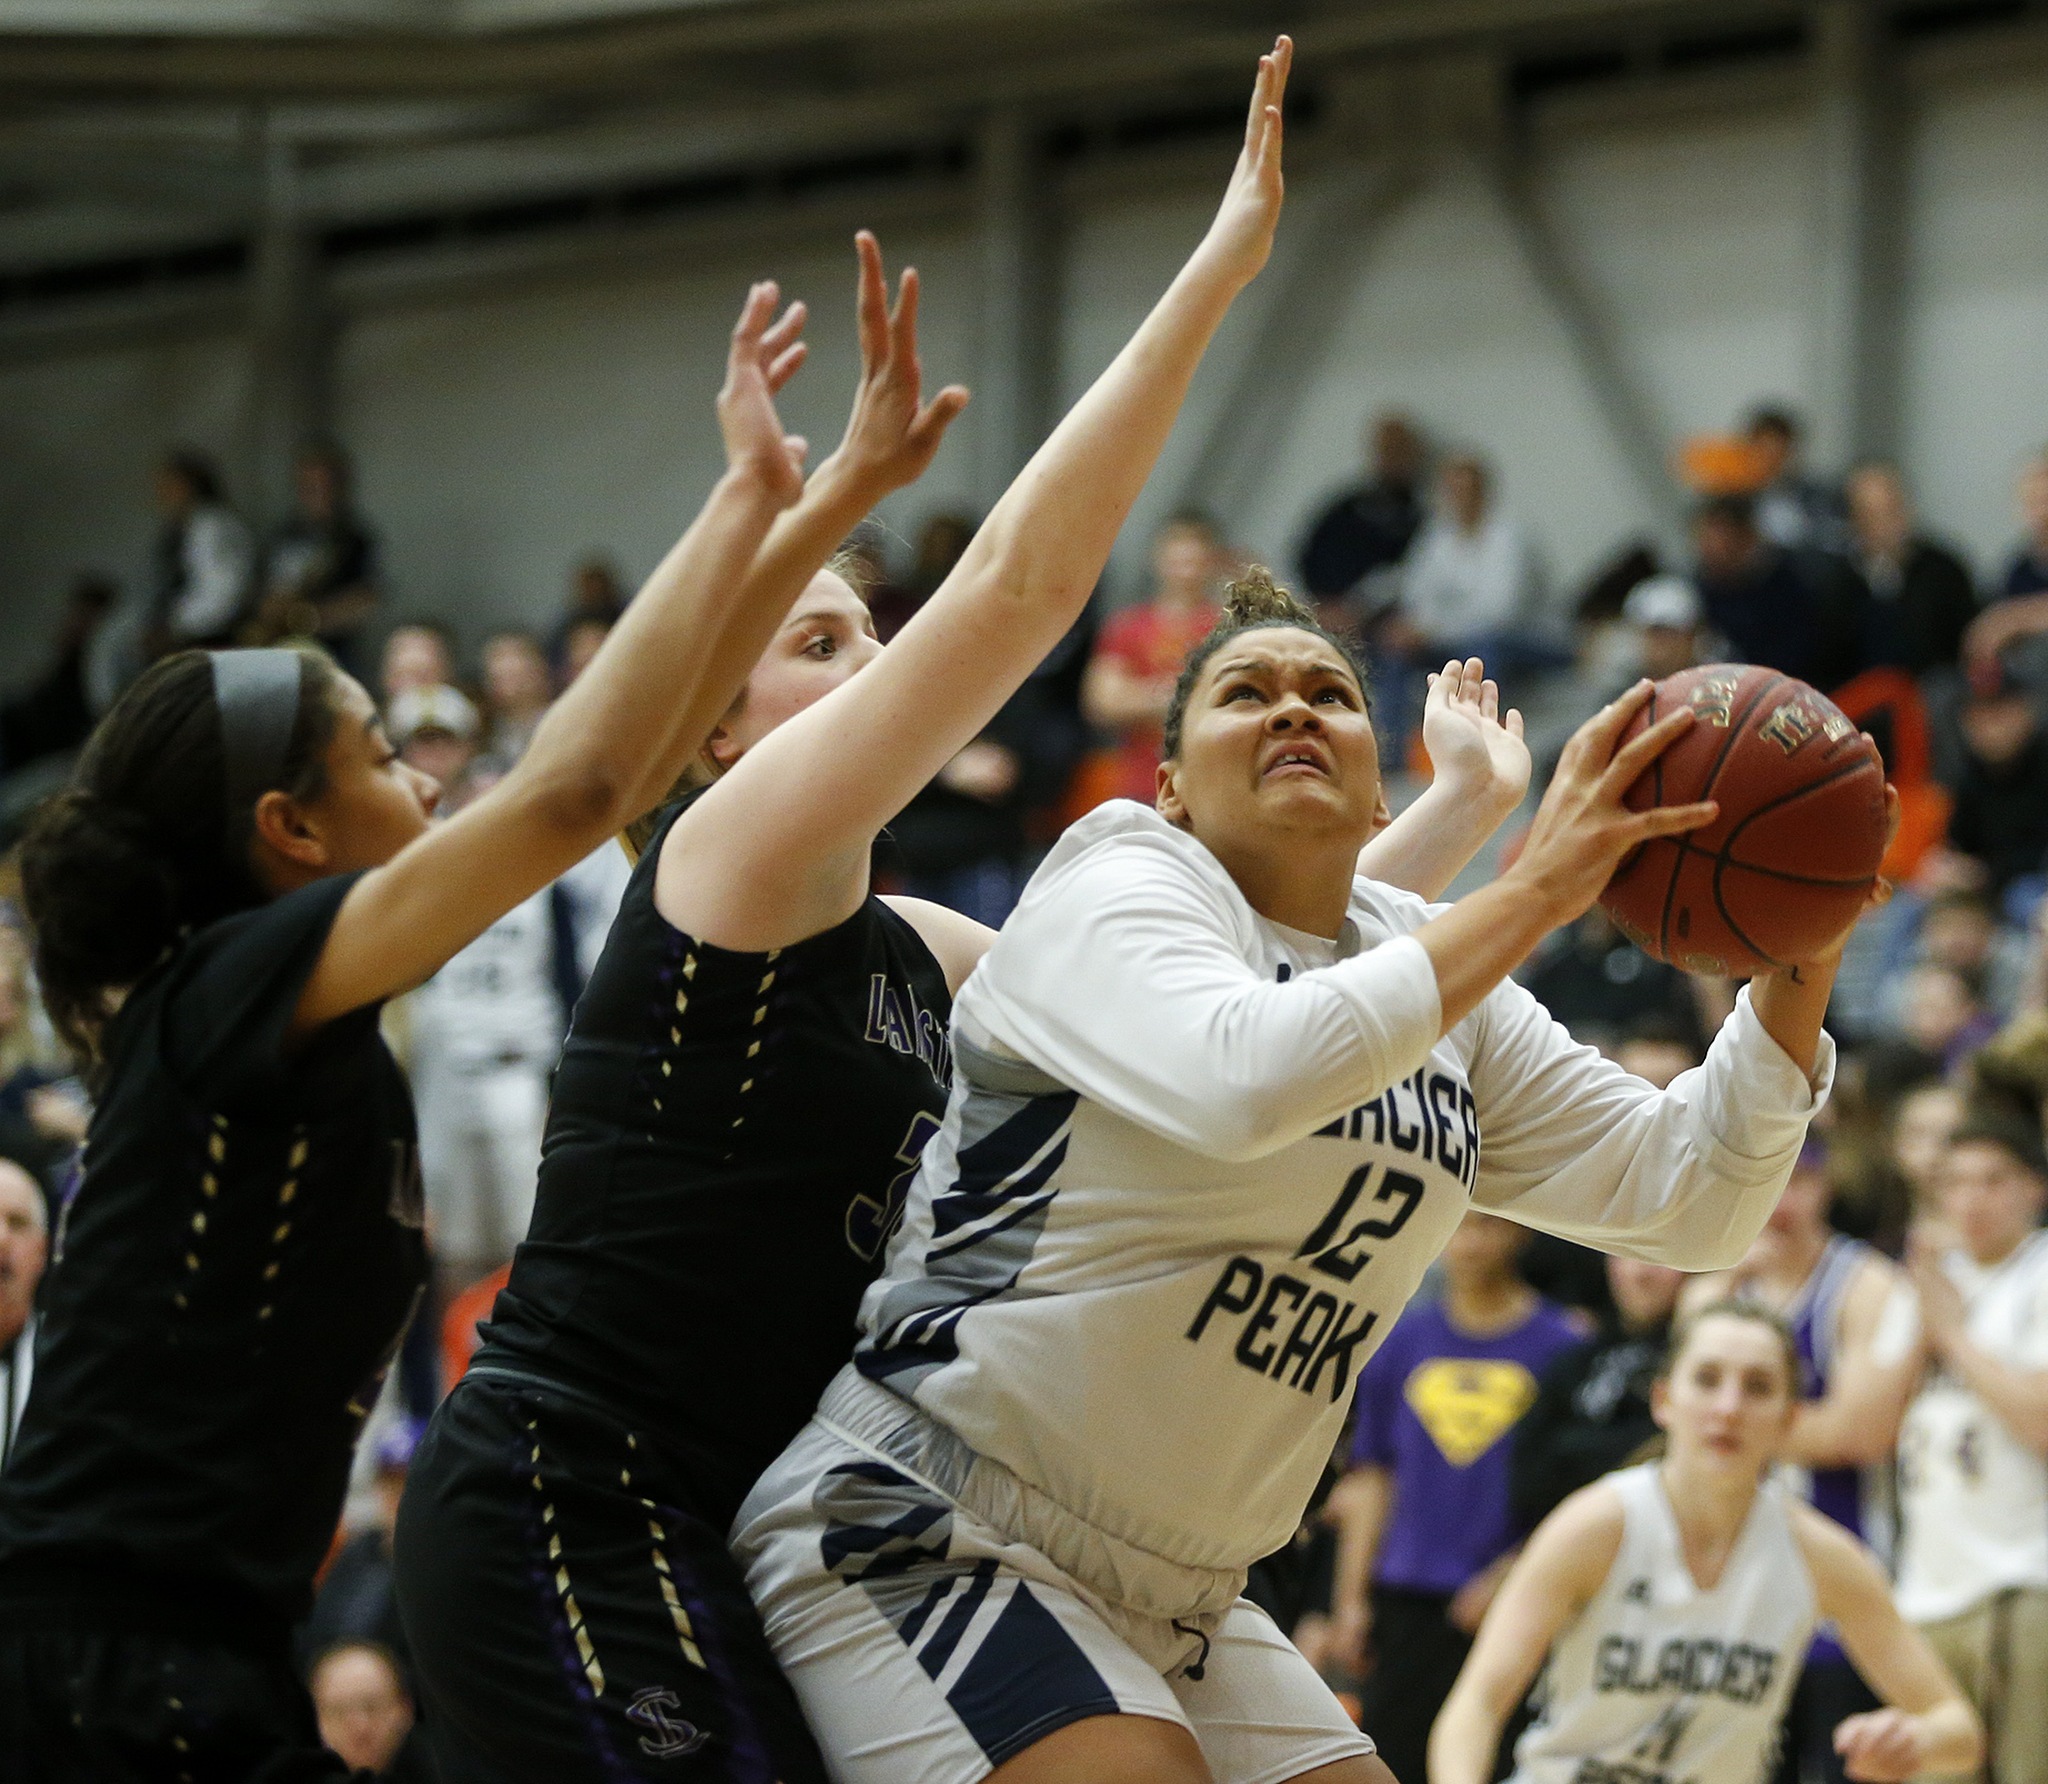 Glacier Peak’s Kayla Watkins (right) goes up for a shot during the Class 4A District 1 girls basketball championship game against Lake Stevens at Everett Community College on Thursday, Feb. 16. Glacier Peak went on to defeat Lake Stevens 60-41. (Ian Terry / The Herald)